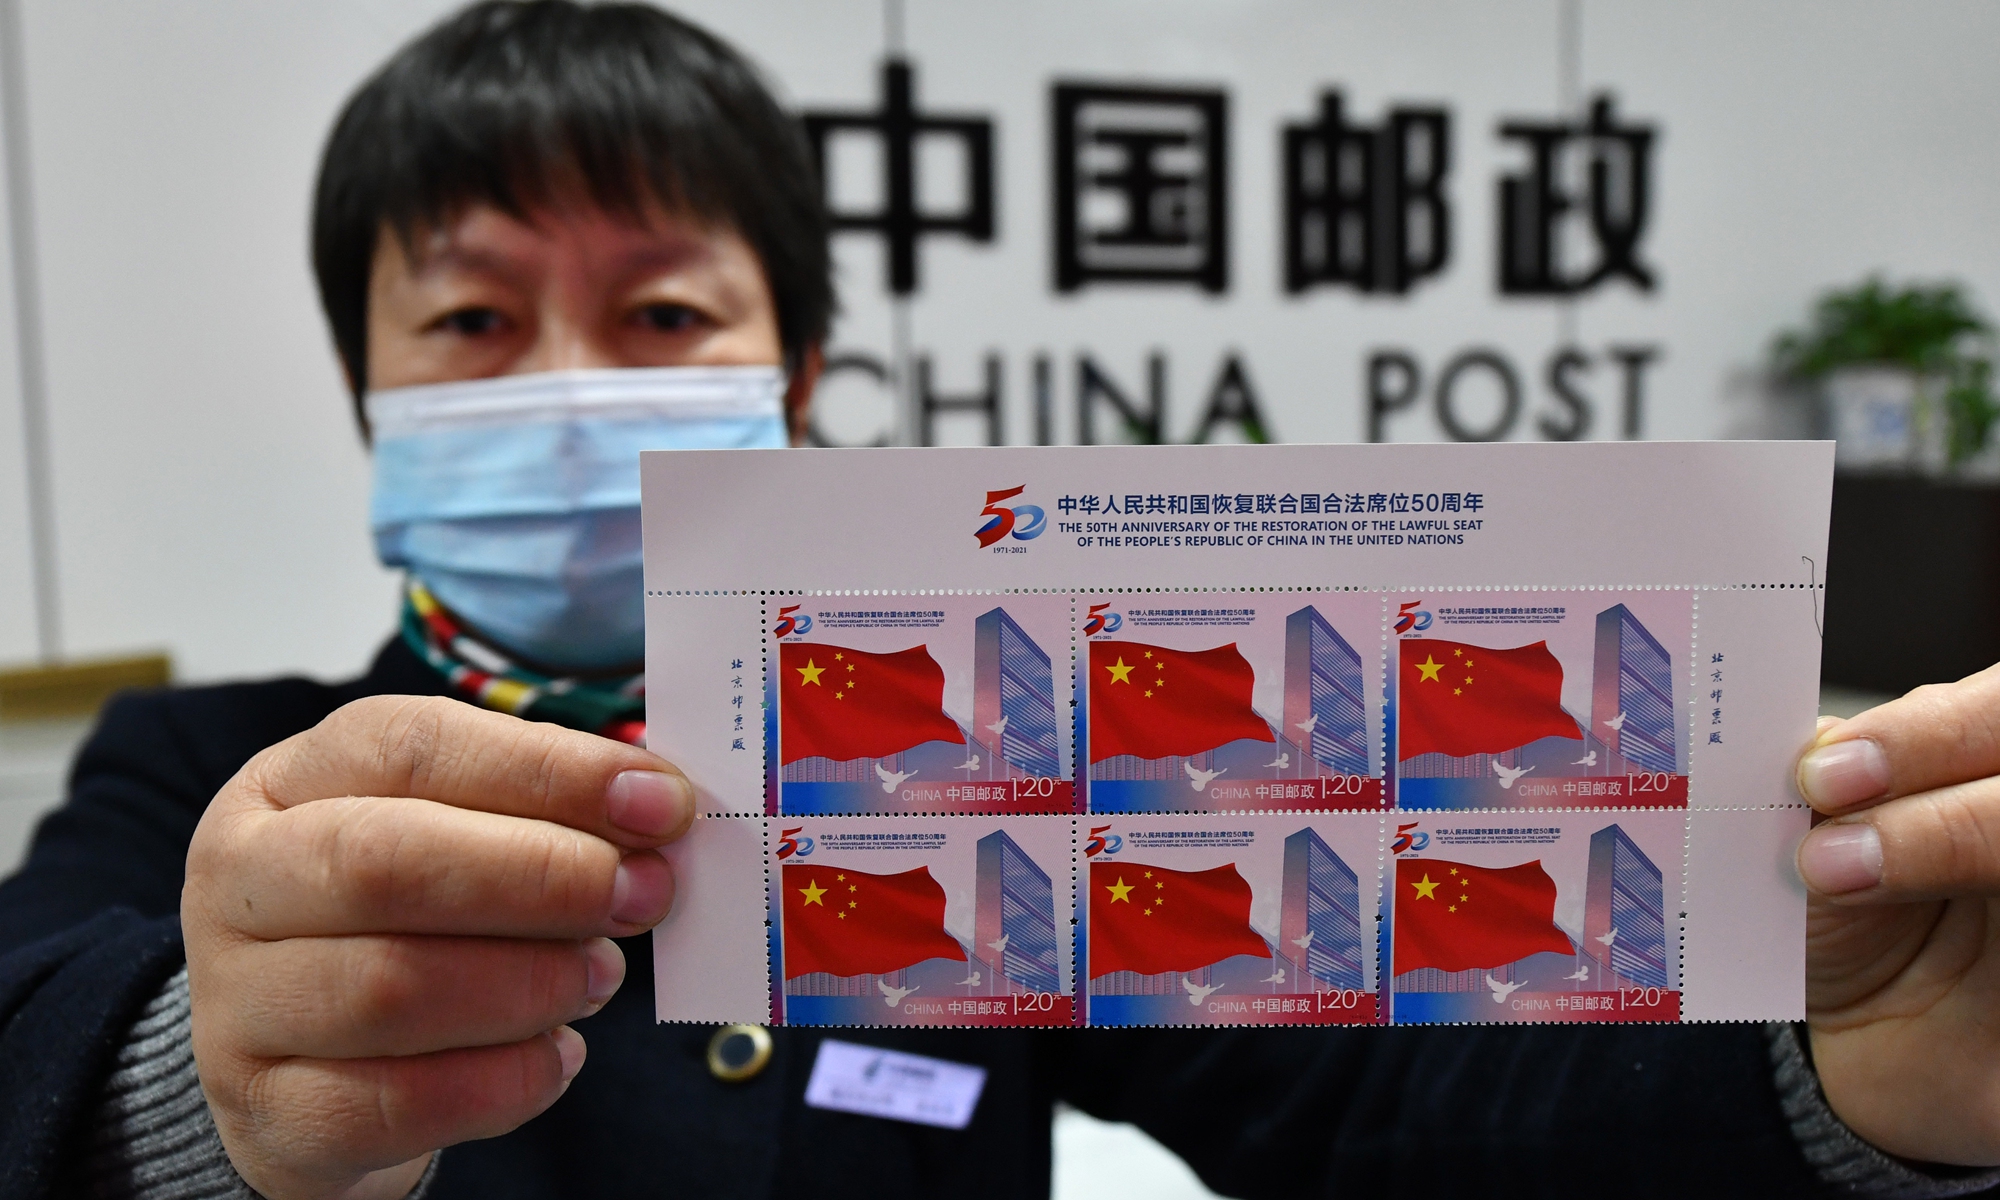 A post office staff member in East China's Anhui Province displays commemorative stamps for the 50th anniversary of the restoration of the lawful seat of the People's Republic of China in the United Nations. China Post will issue a set of commemorative stamps on October 25, 2021 to mark the anniversary.  Photo: cnsphoto